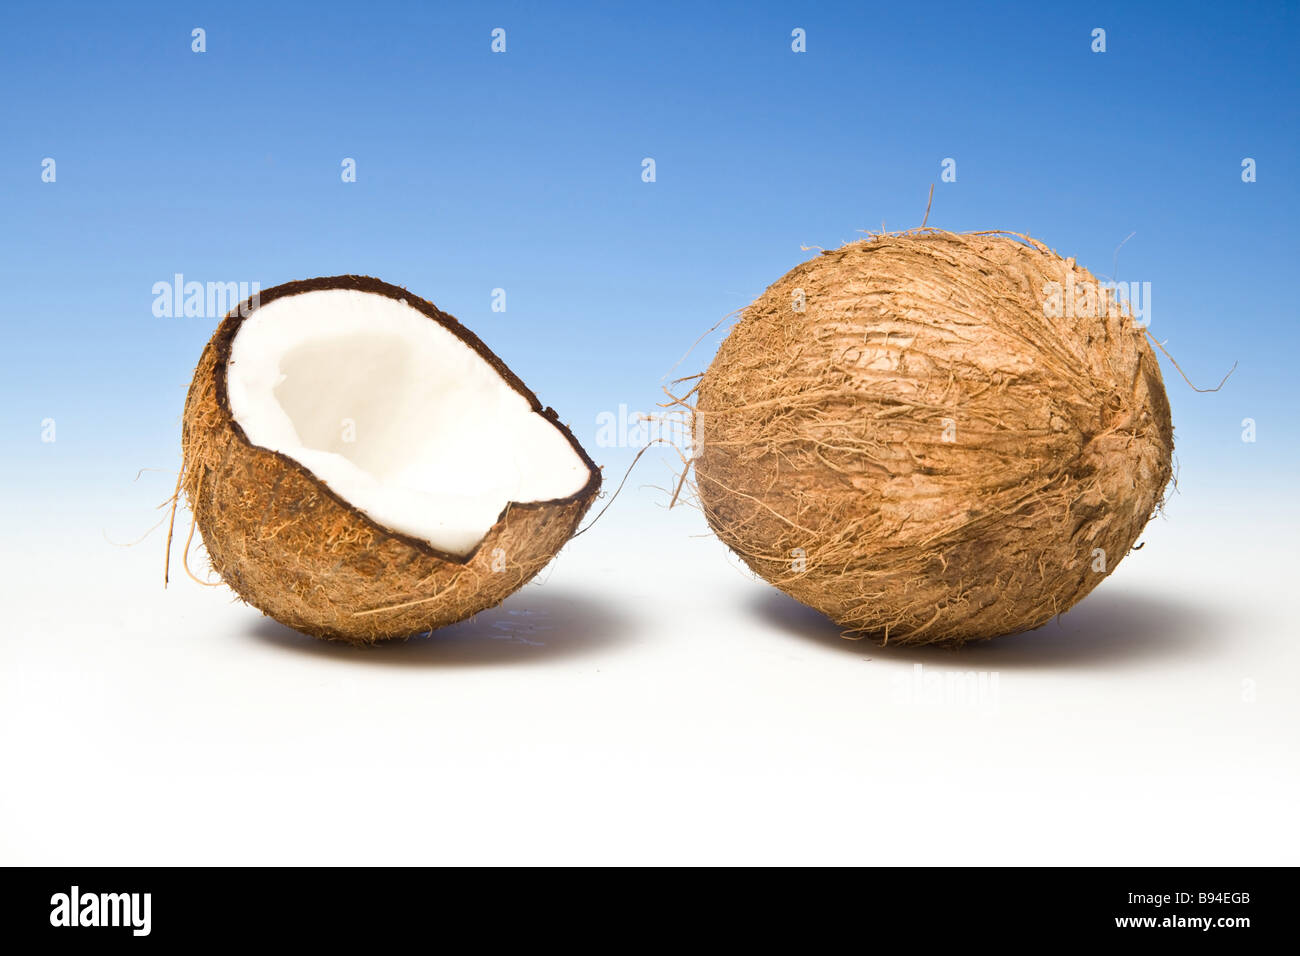 Coconuts on a graduated blue studio background Stock Photo